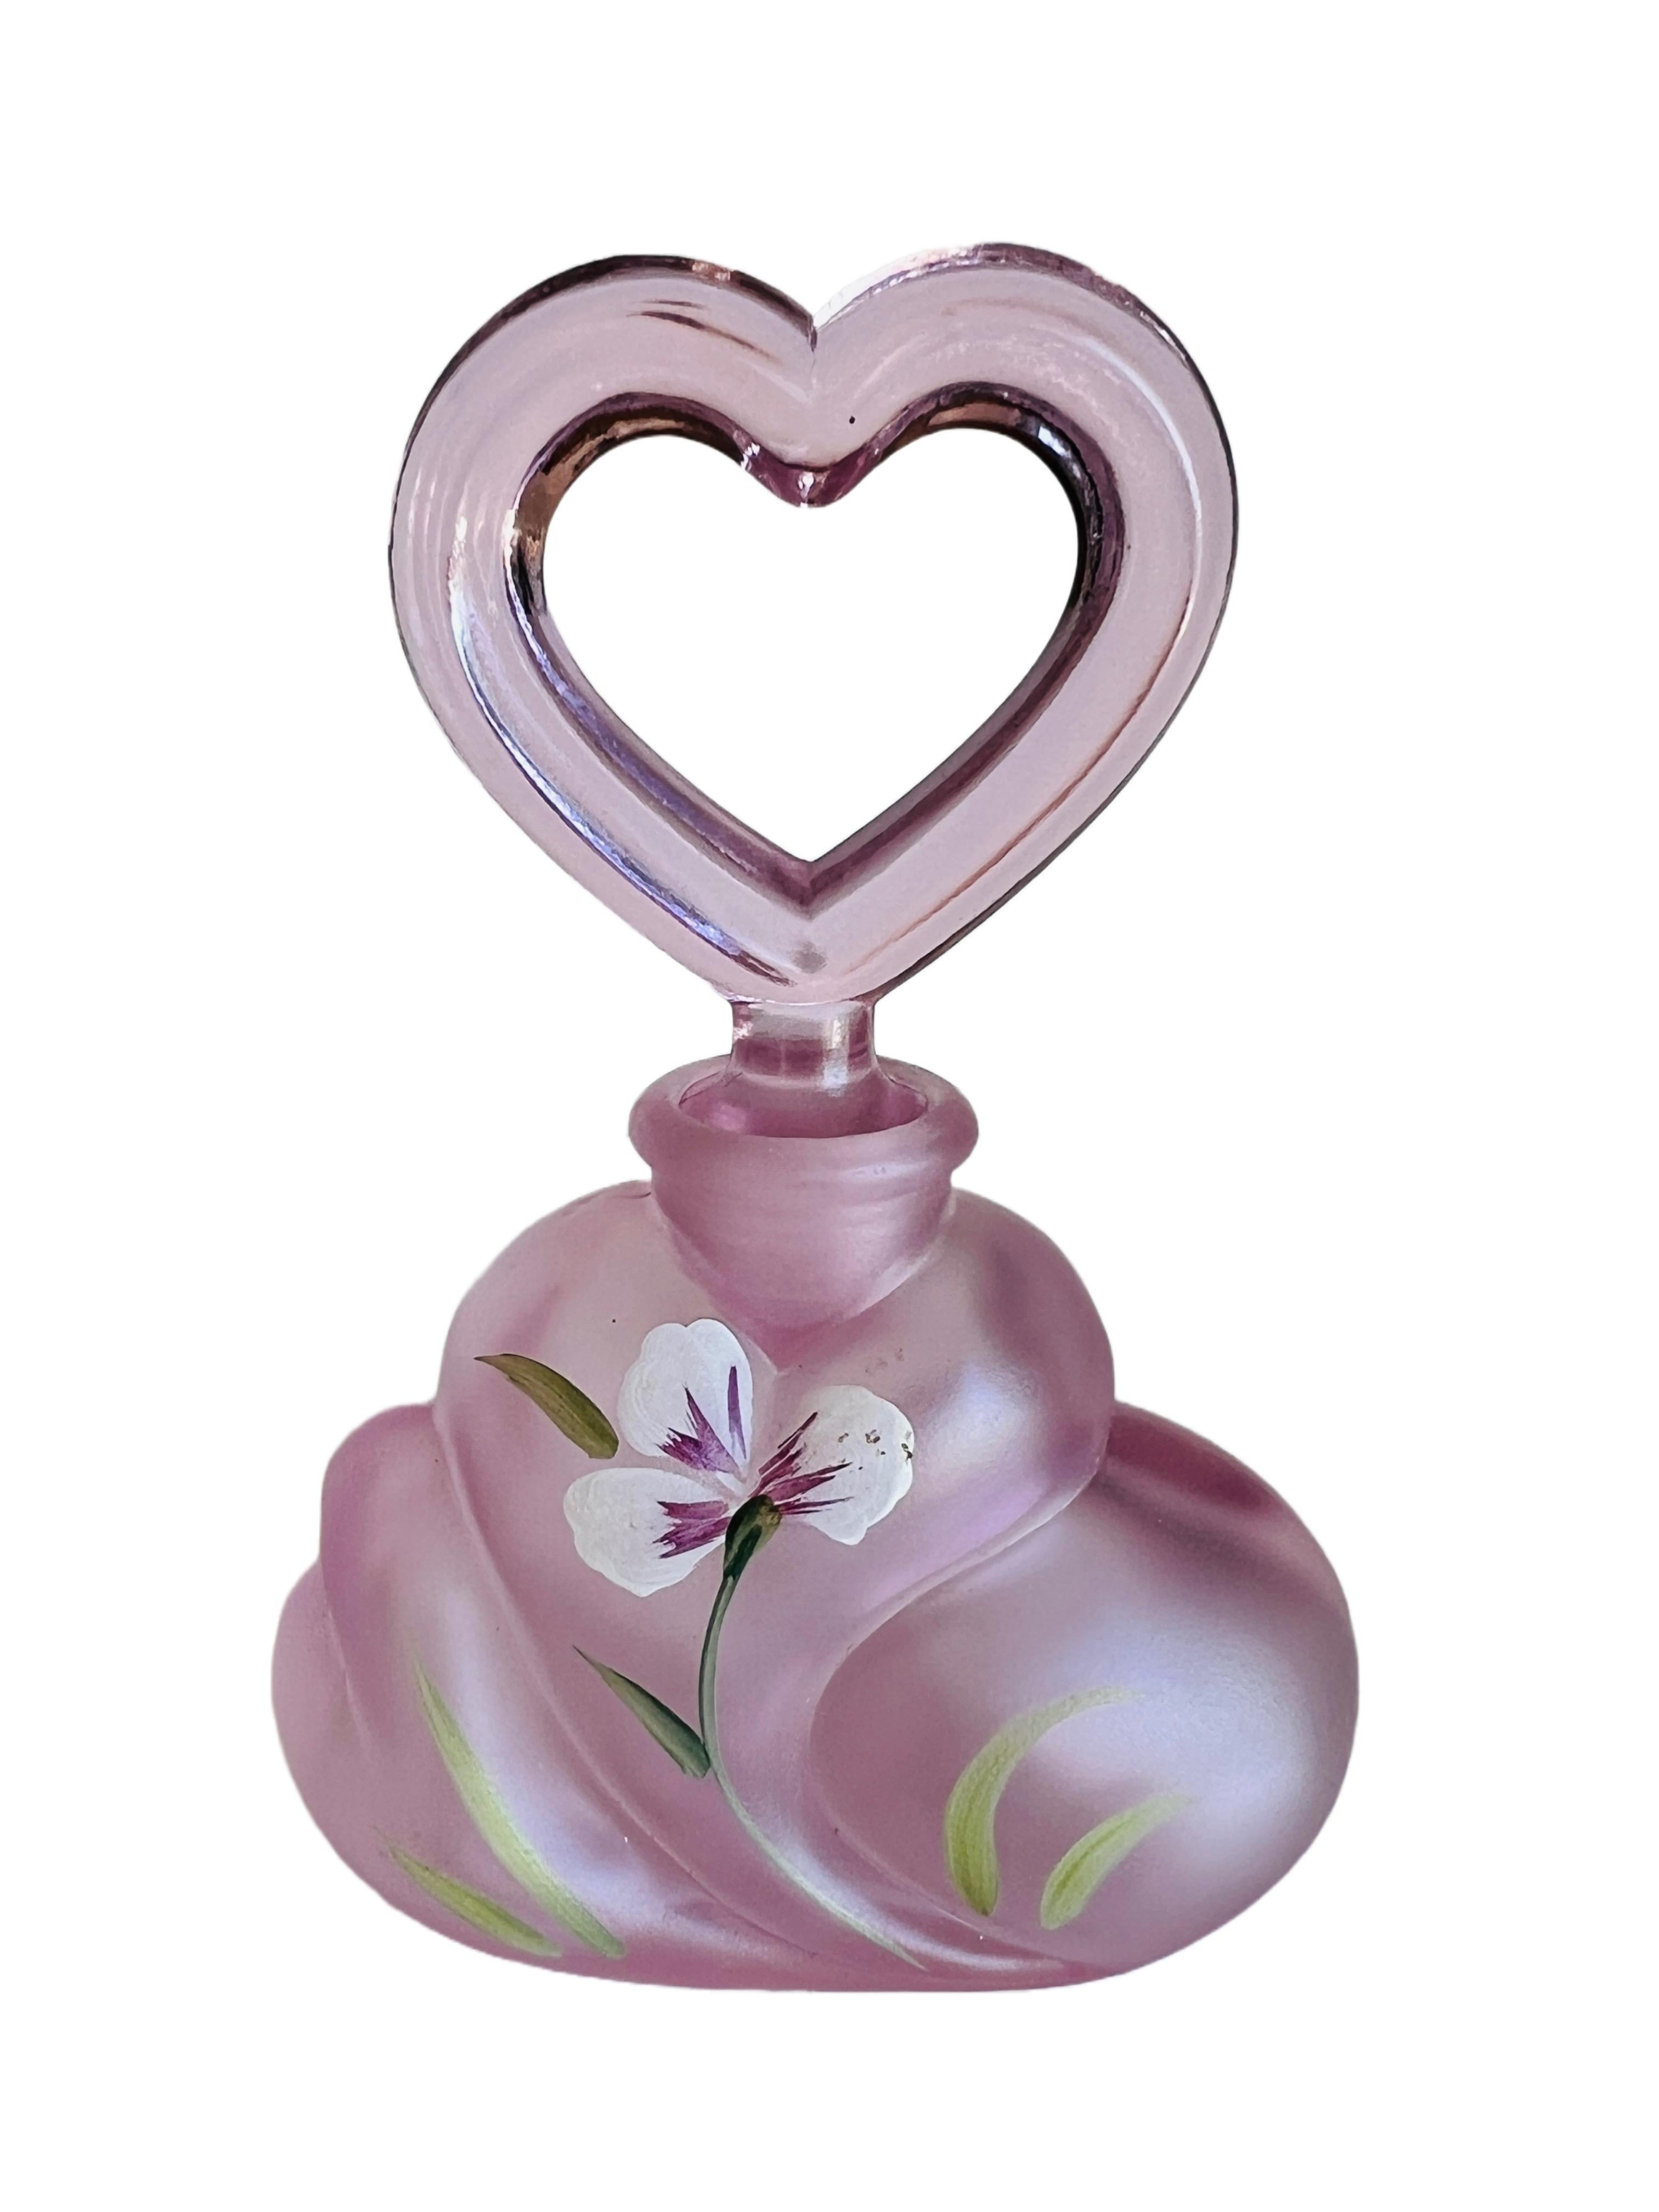 Stunning vintage Fenton pink glass perfume bottle, adorned with a hand-painted floral design and finished with a charming heart-shaped stopper. Artist numbered and signed by both D. Cutshaw and Fenton.

D. Cutshaw is an artist known for